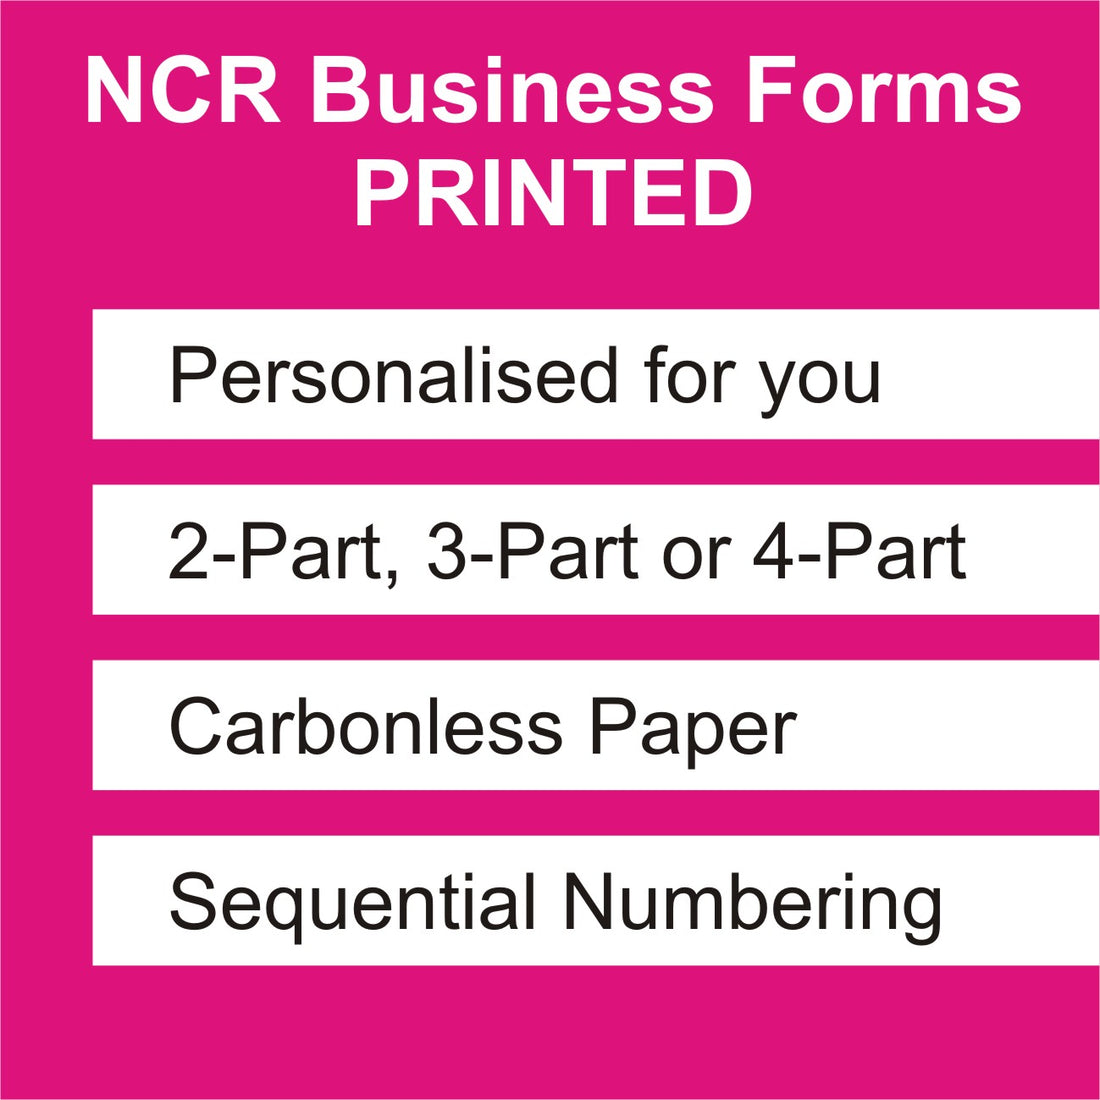 Buy NCR Printed Business Forms Now! - FREE Delivery UK Mainland